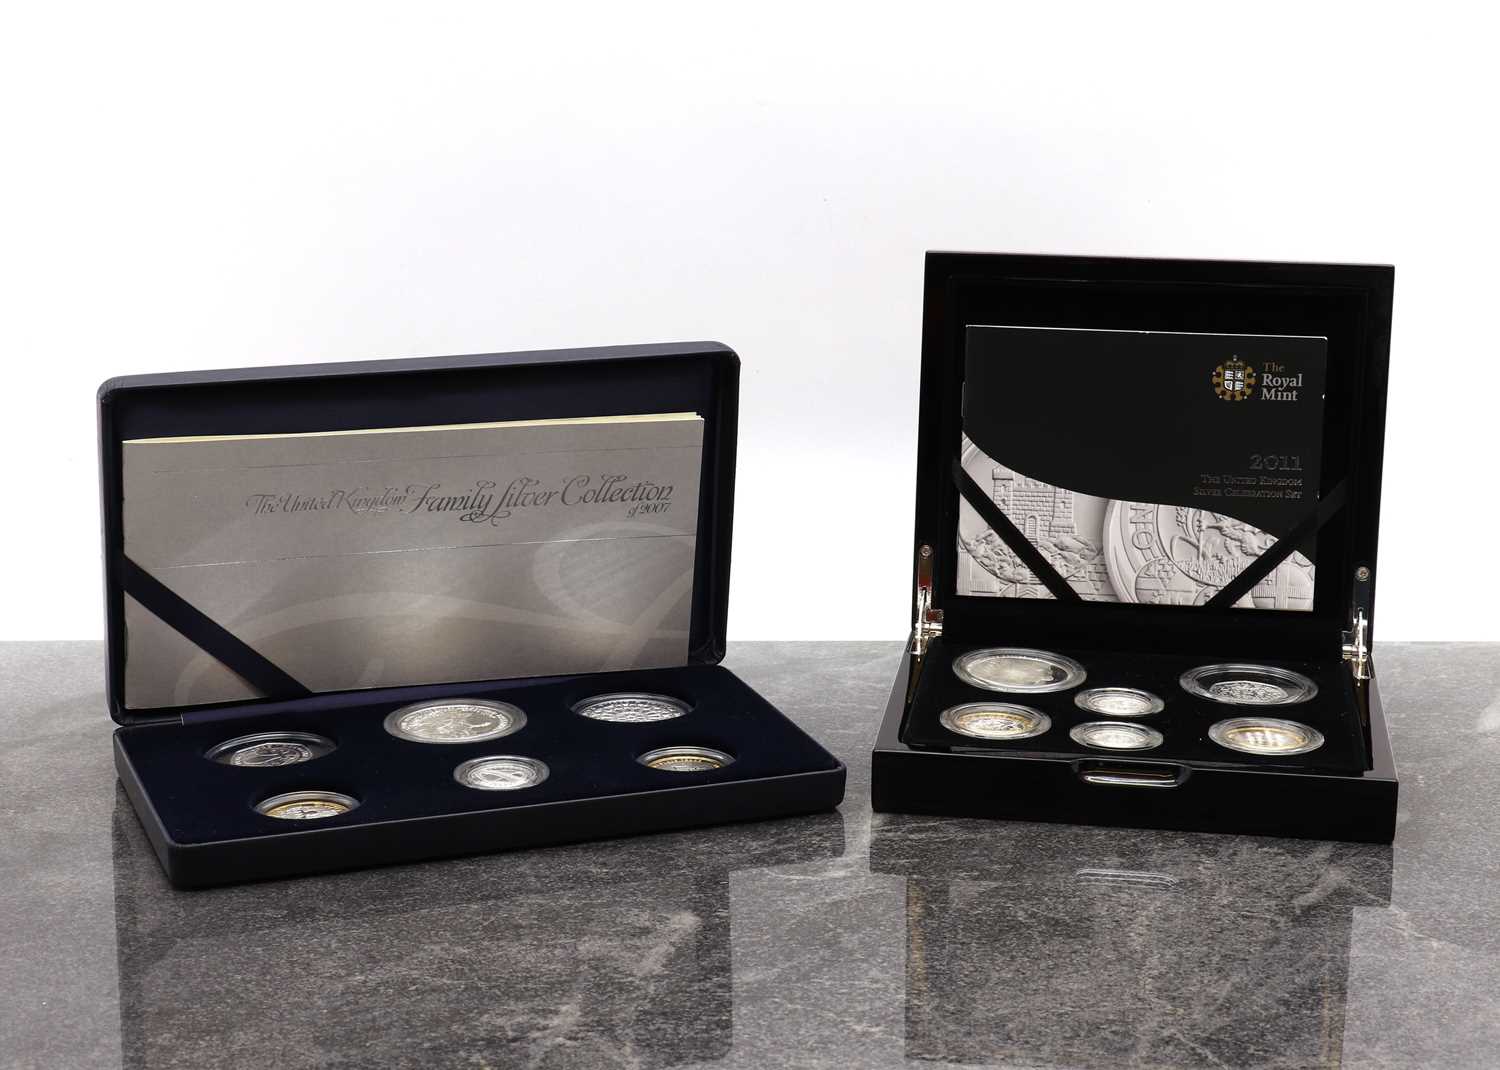 UK Family Silver collection 2007,